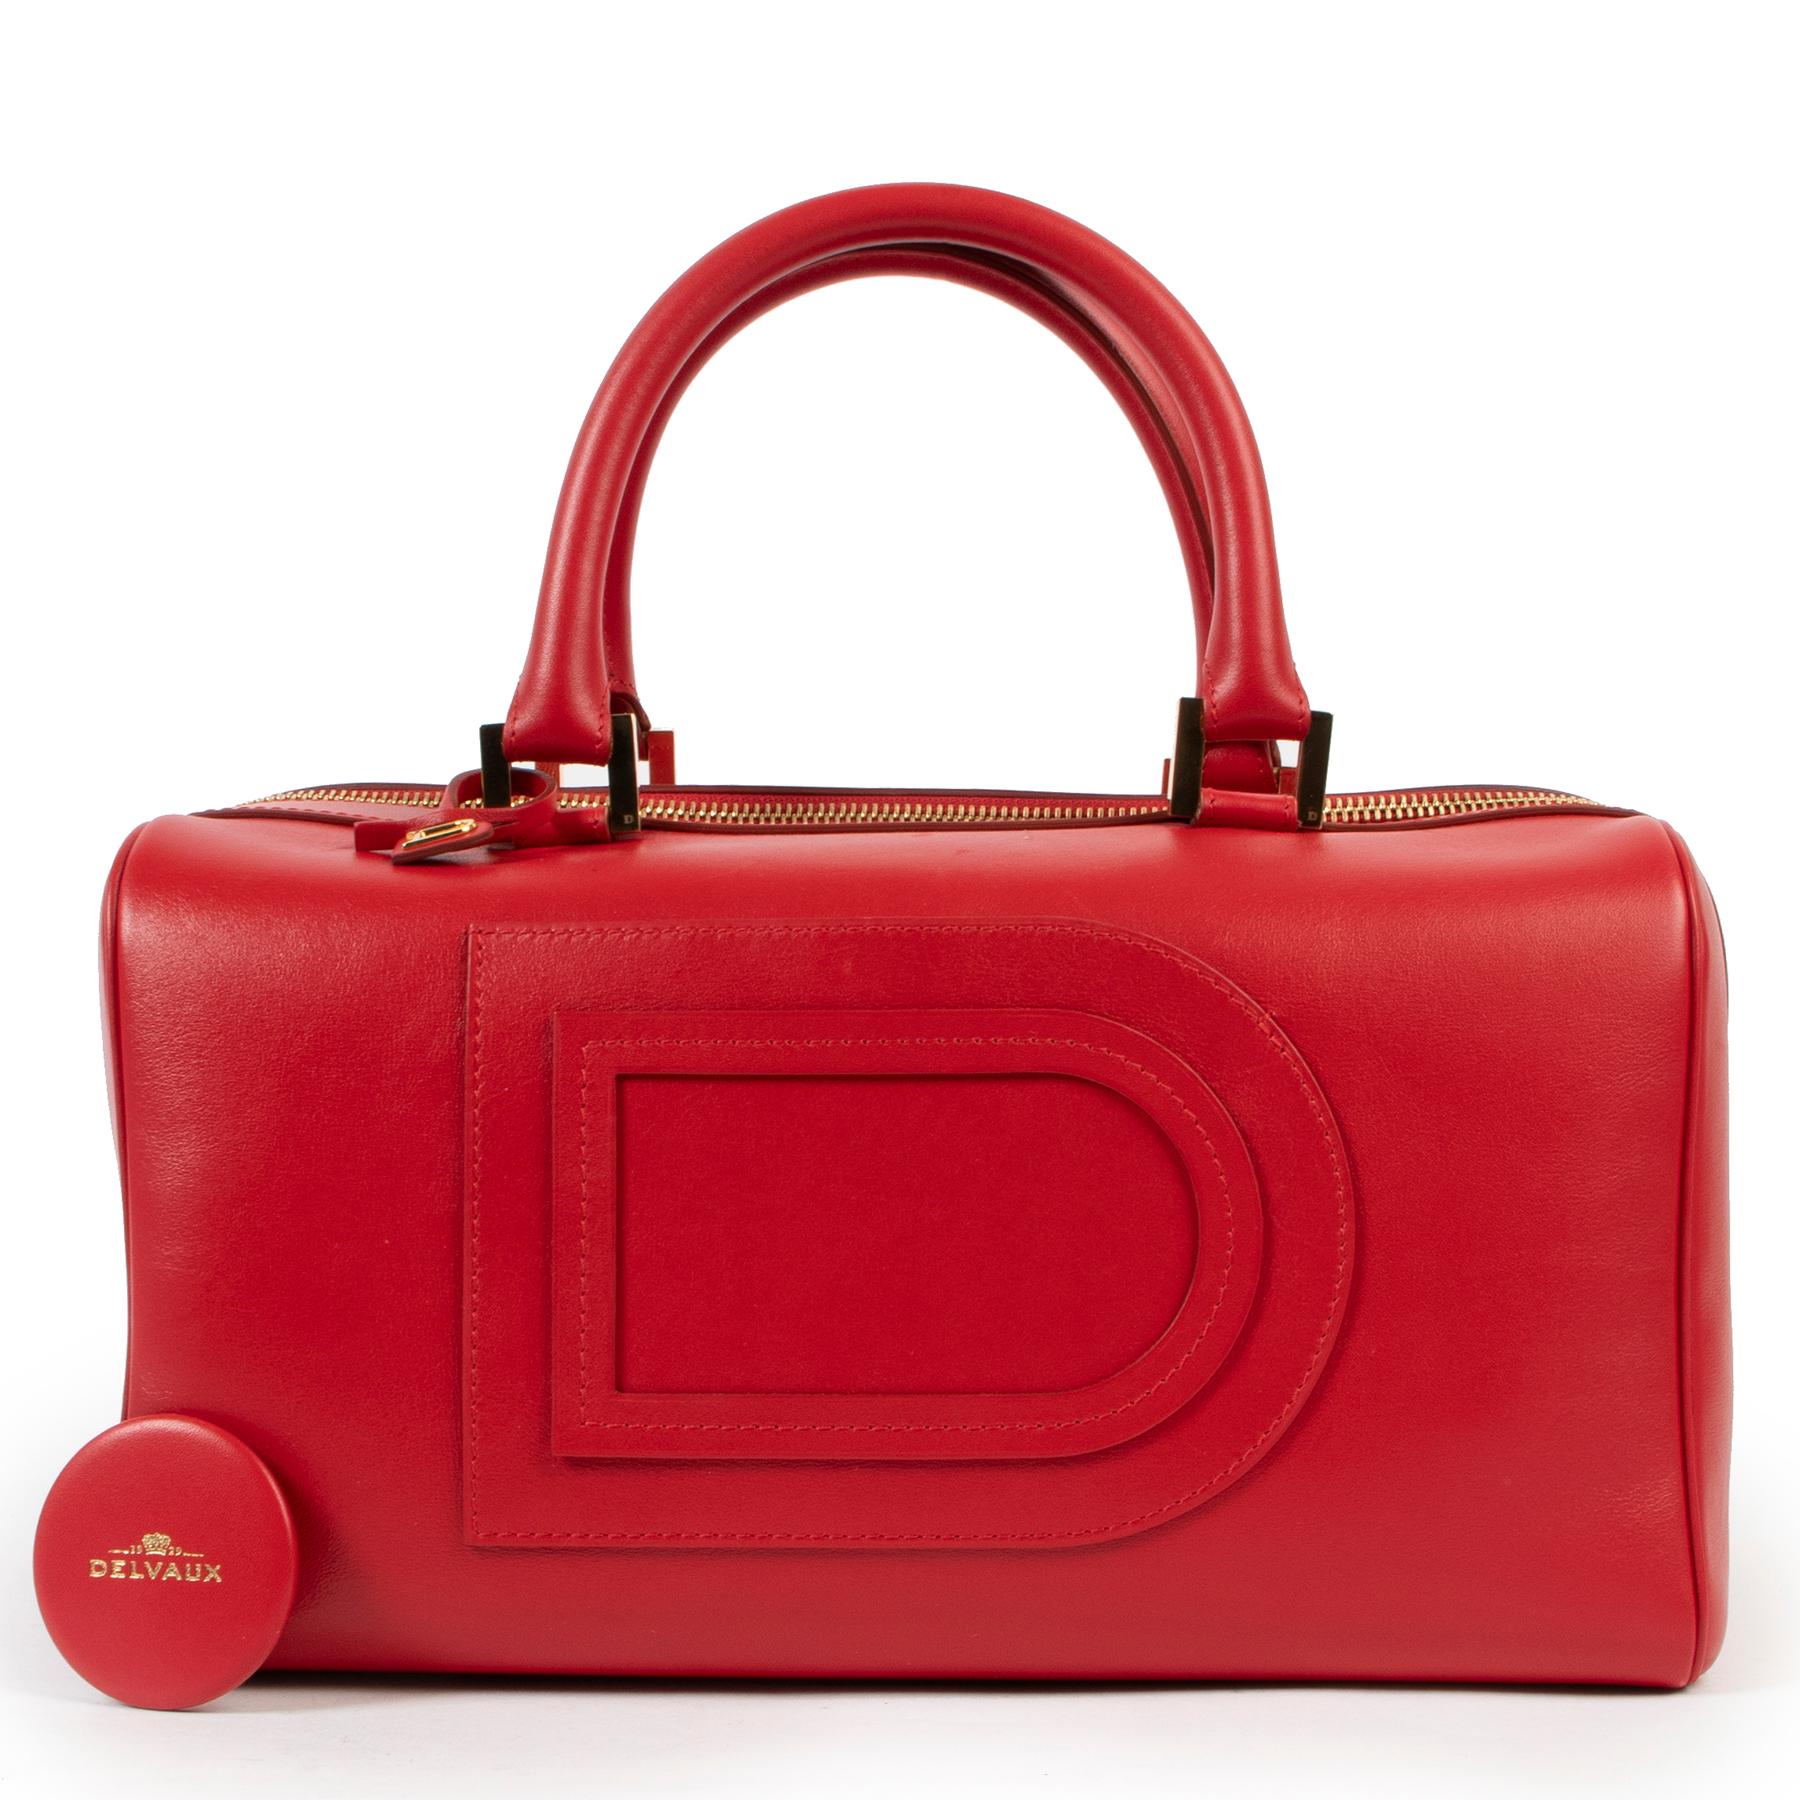 Delvaux Red Louise Boston Top Handle Bag

Crafted in Red leather and finished with gold-toned hardware, this Romantic Delvaux is a truly must-have! The interior is very spacious and has a zip- and patch pocket with an extra key holder. The bag has a